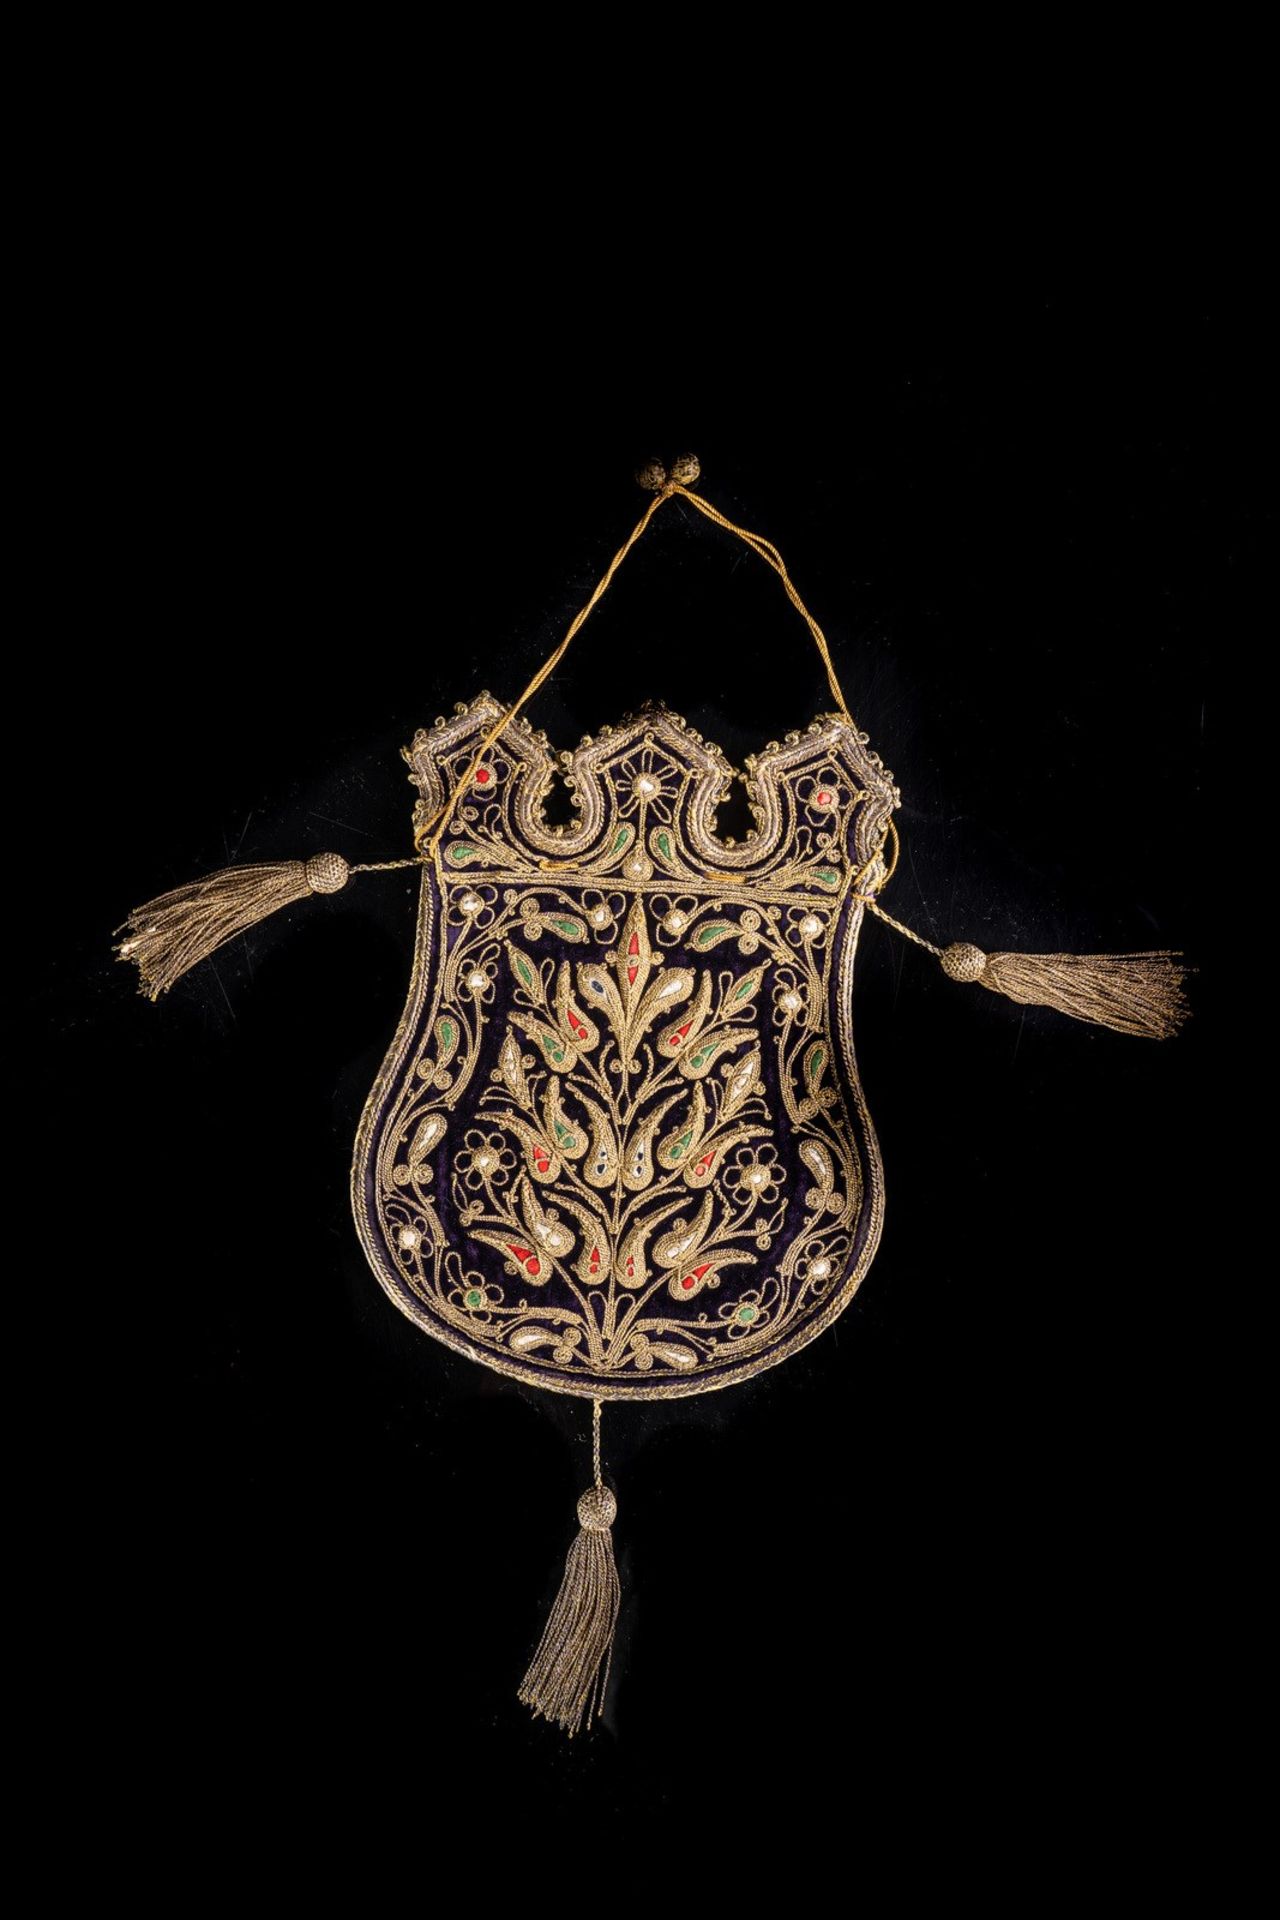 Arte Islamica An Ottoman velvet purse embroidered with flowersOttoman Empire, possibly Greece, 18th - Image 3 of 4